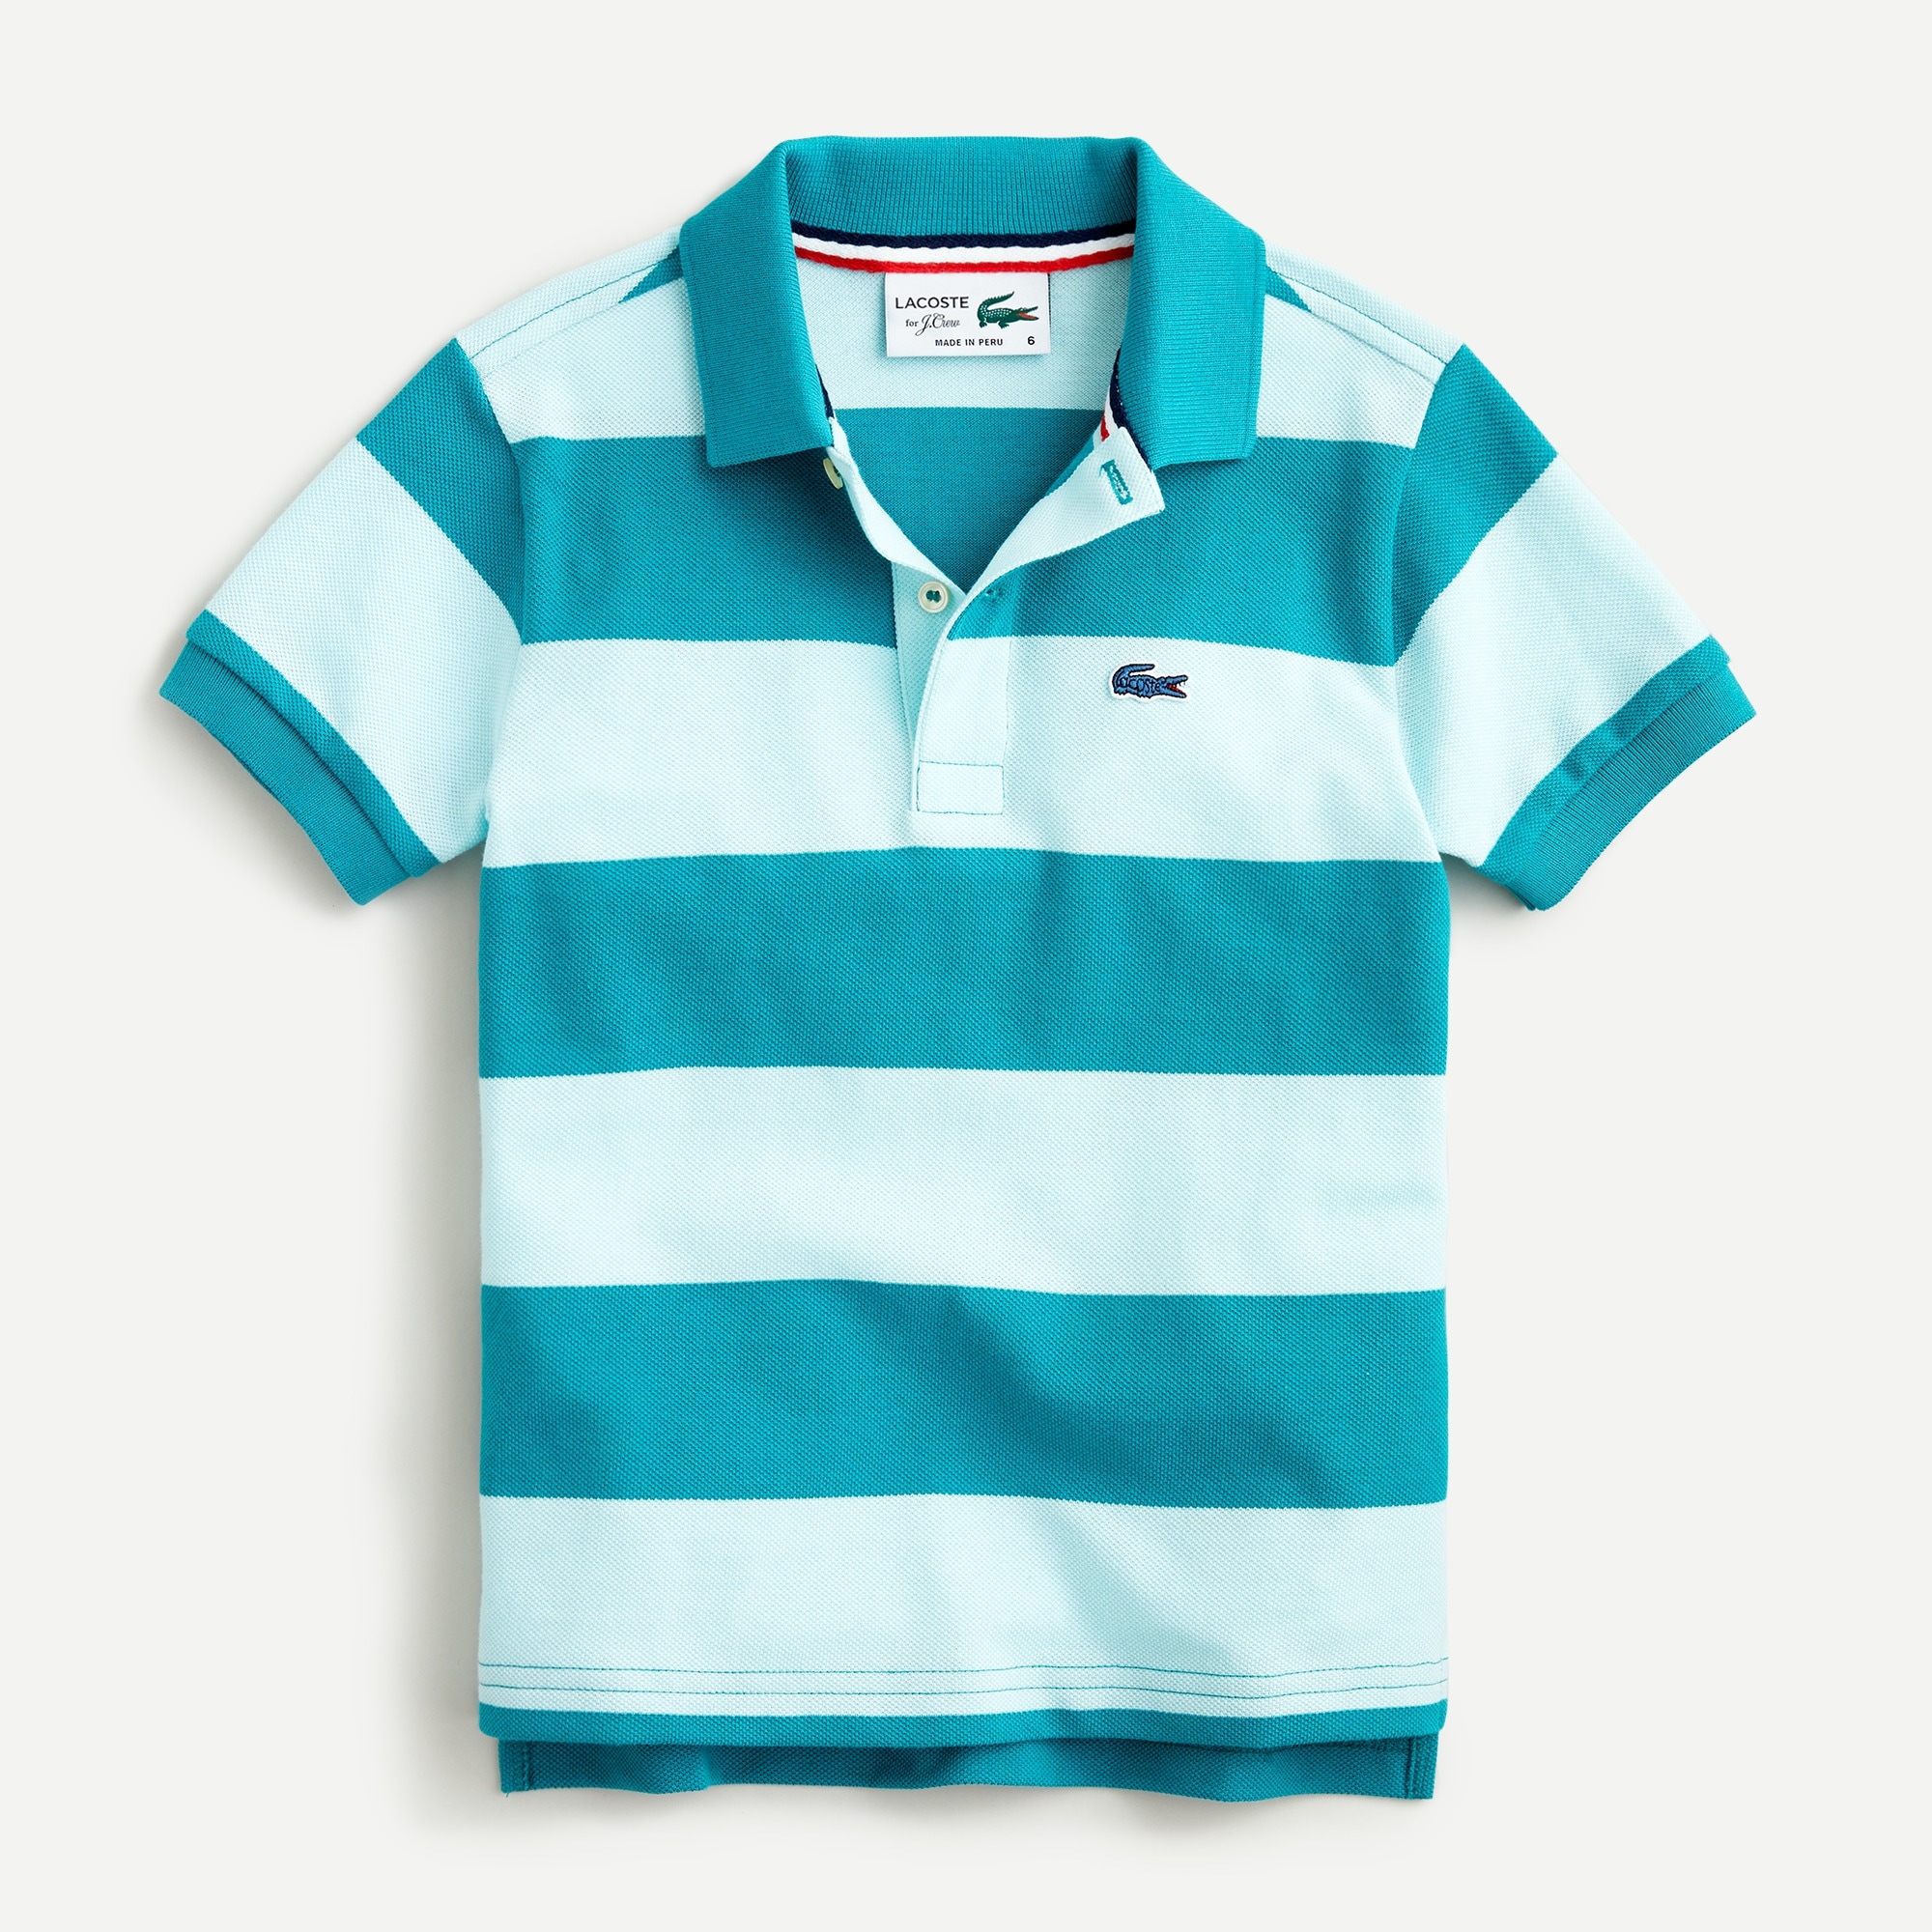 buy lacoste shirts